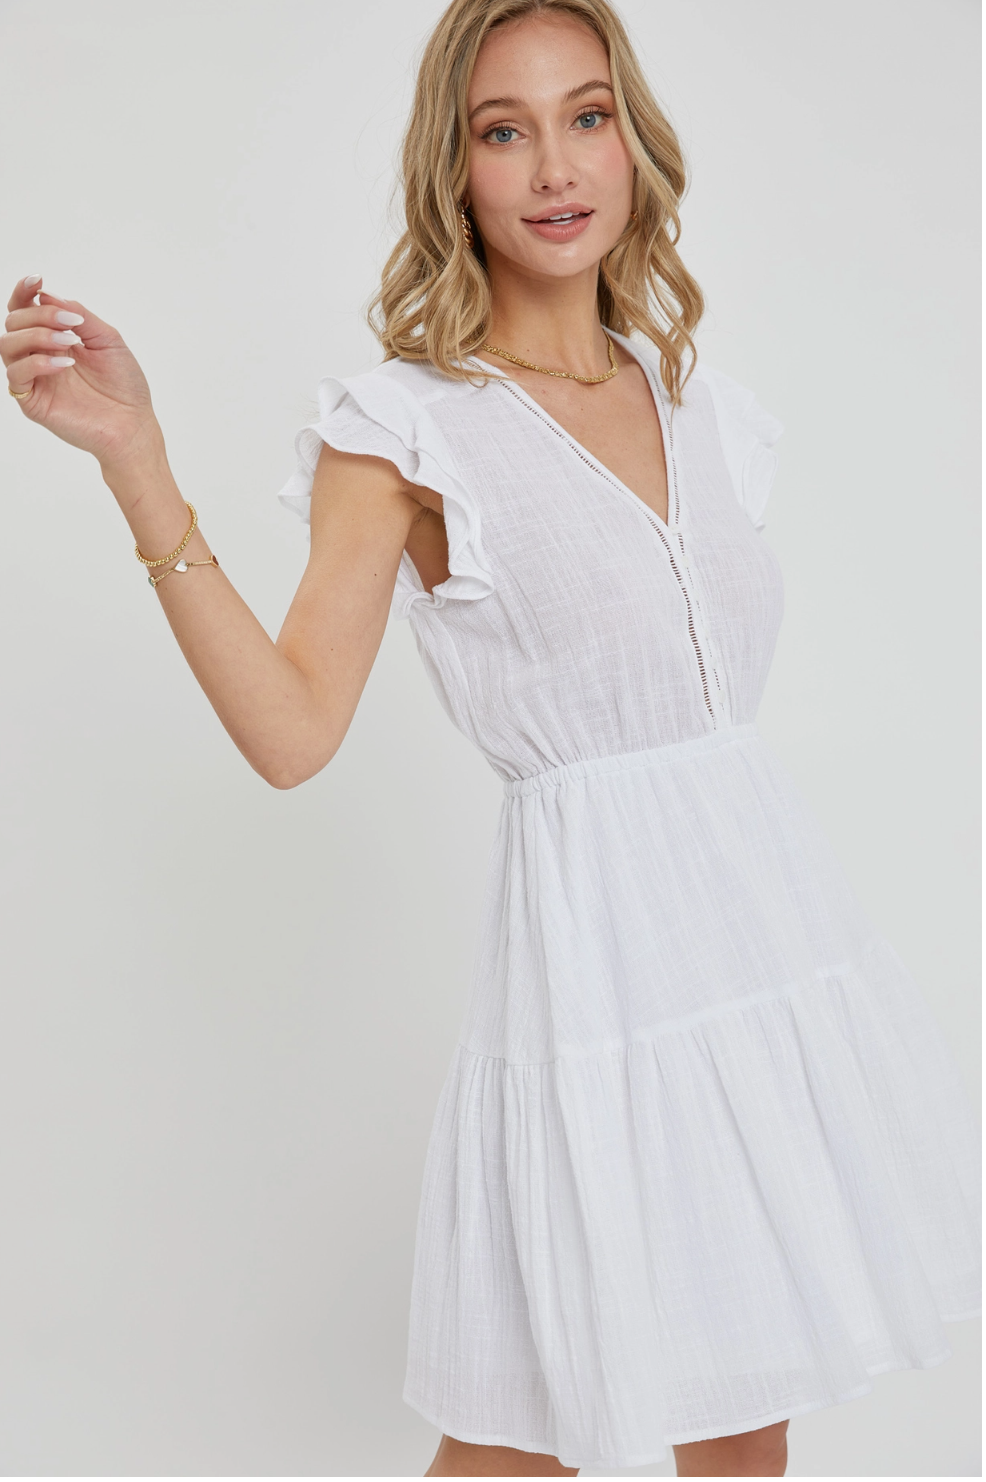 White Ruffle Button Down Mini Dress - The Midwest Closet Collection